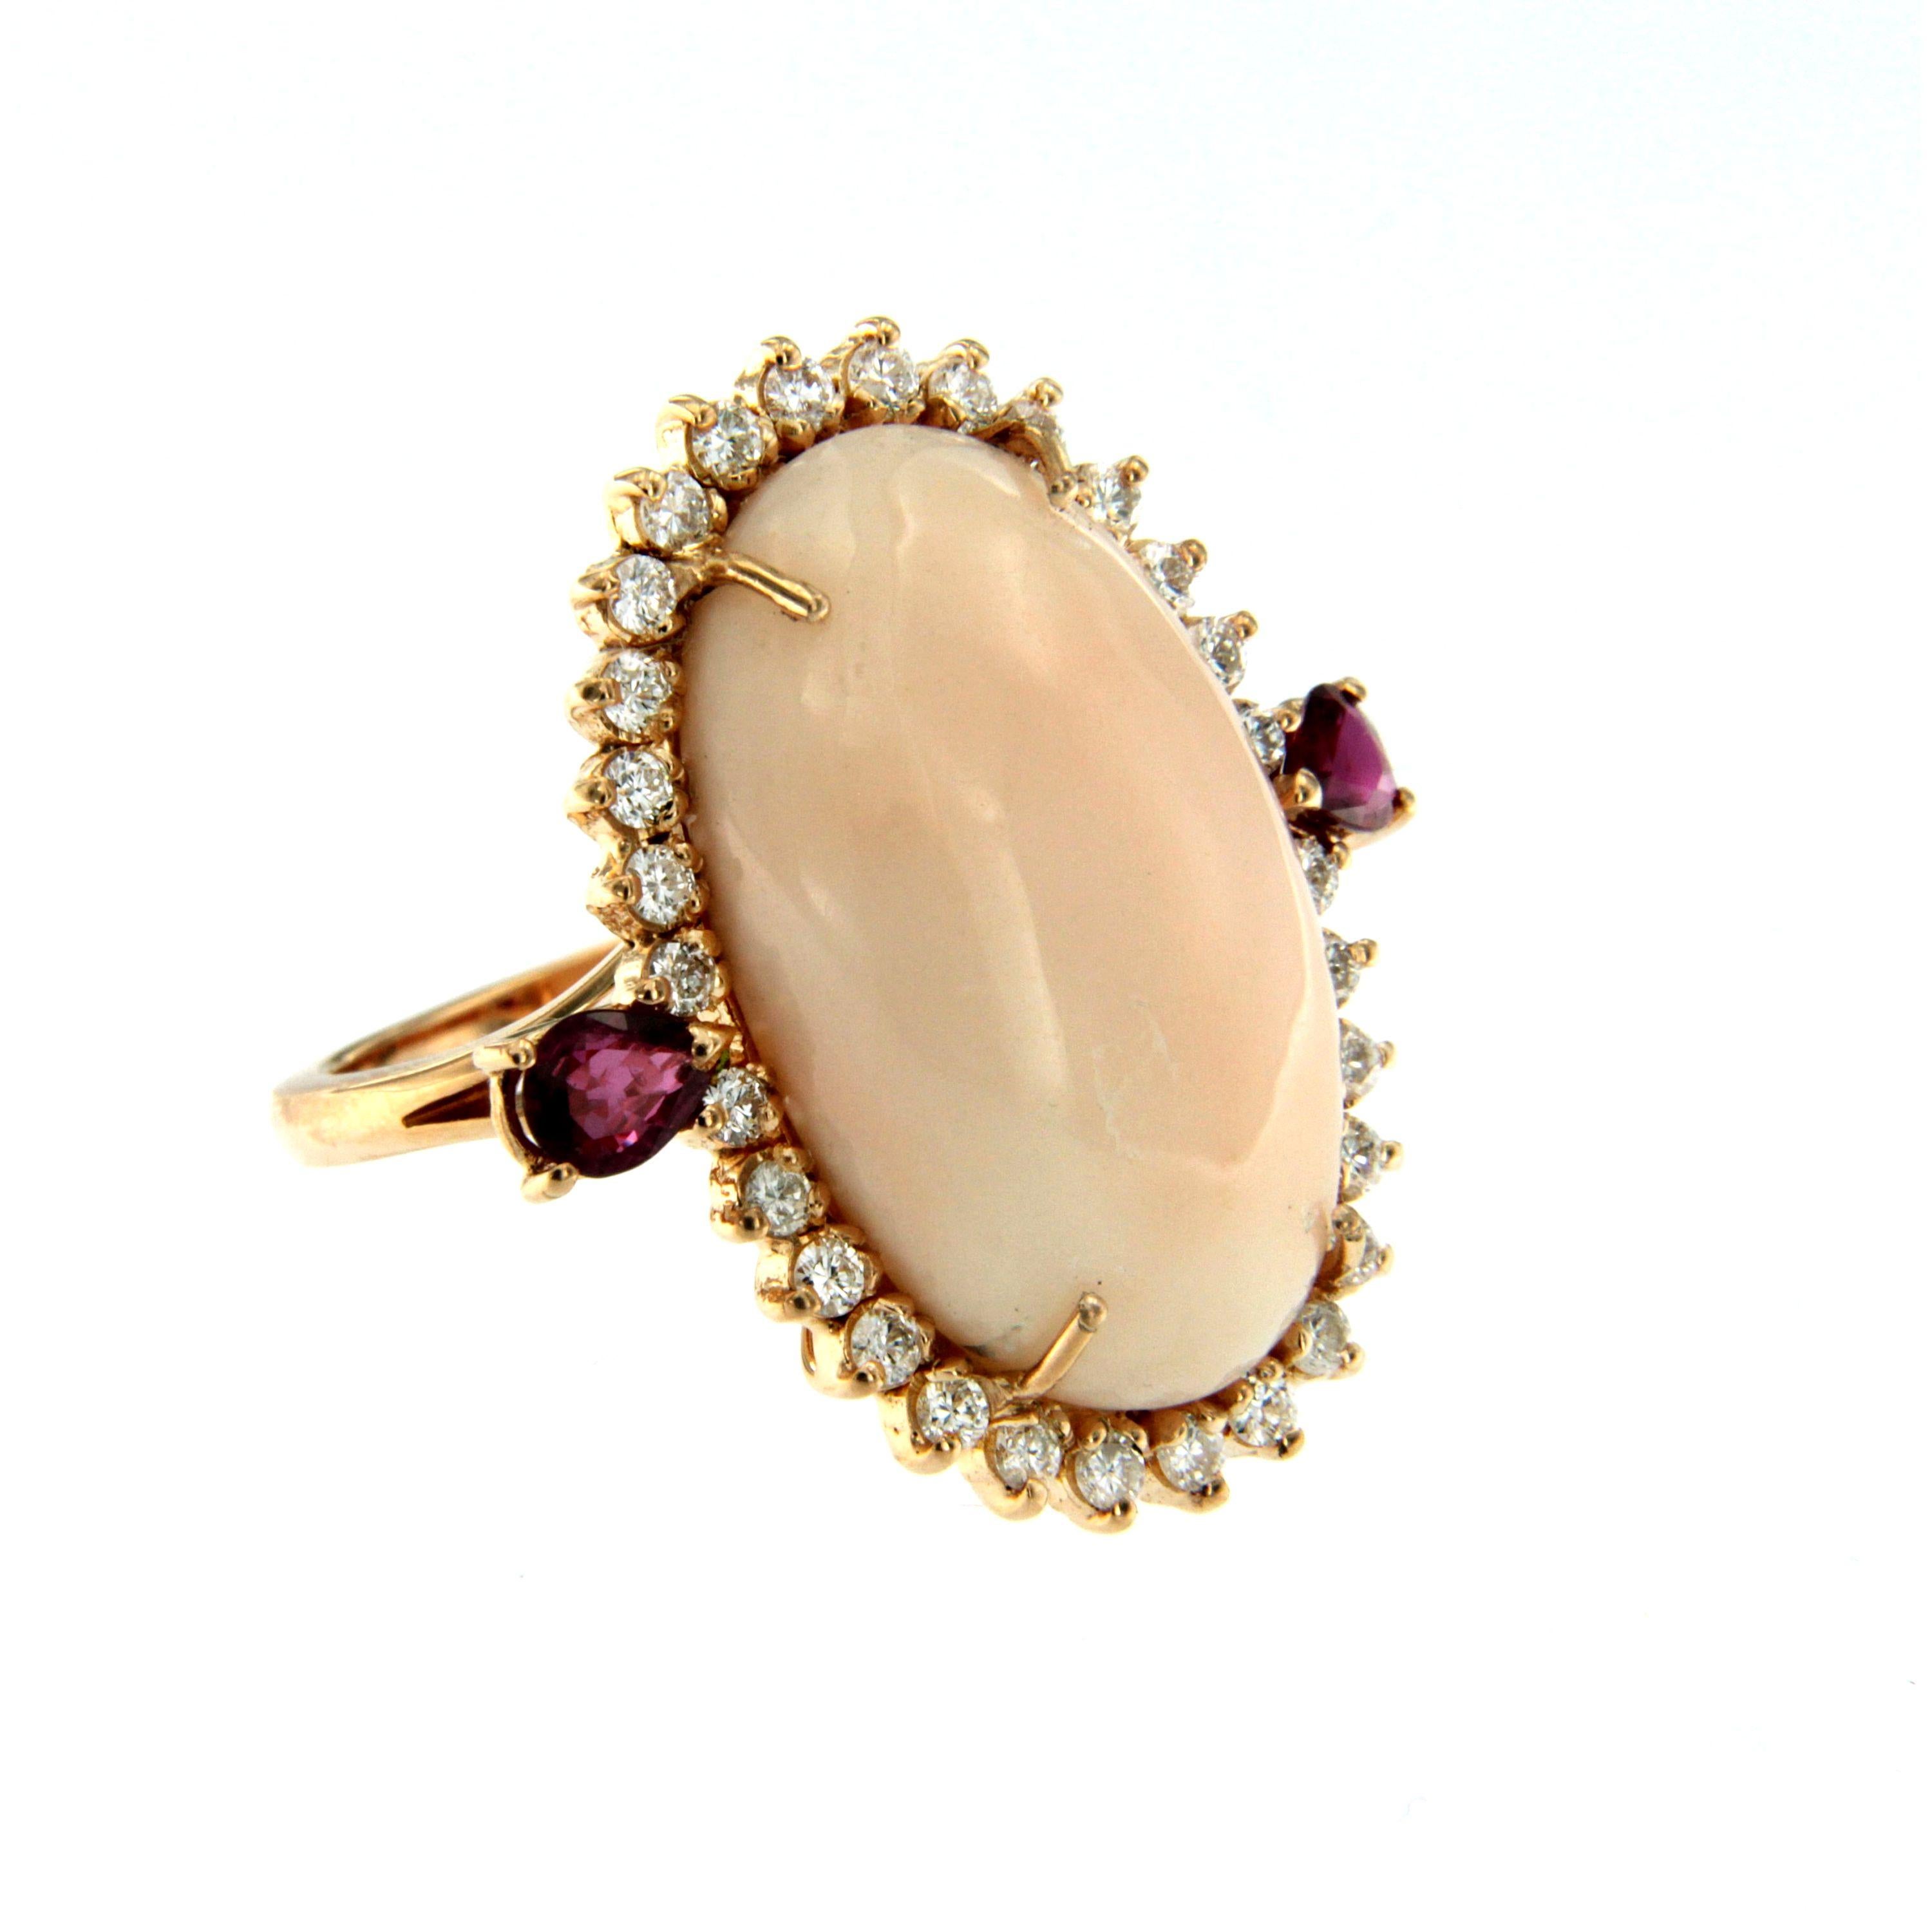 Beautiful Retro Cocktail Ring mounted in 18k rose gold set with a natural, of great quality, Peau D'Ange/Angel skin Coral  24.56 x 16 mm and surrounded by 0.60 carat of Round brilliant cut diamonds graded G color Vvs clarity and two beautiful fine